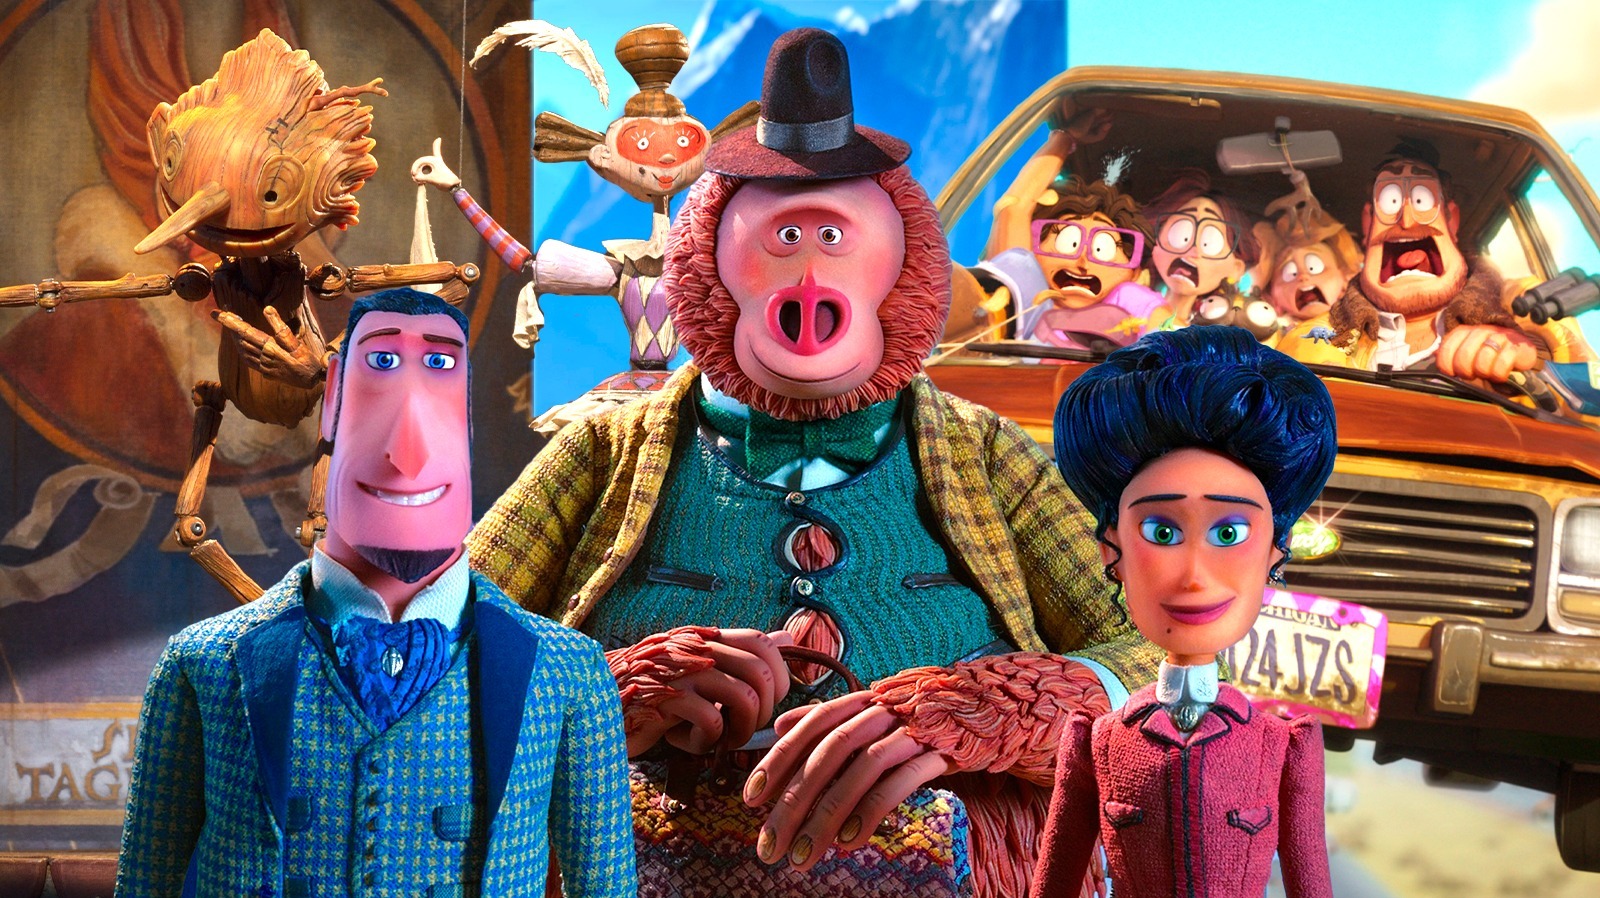 The 10 Most Immersive Stop-Motion Animation Movies, Ranked